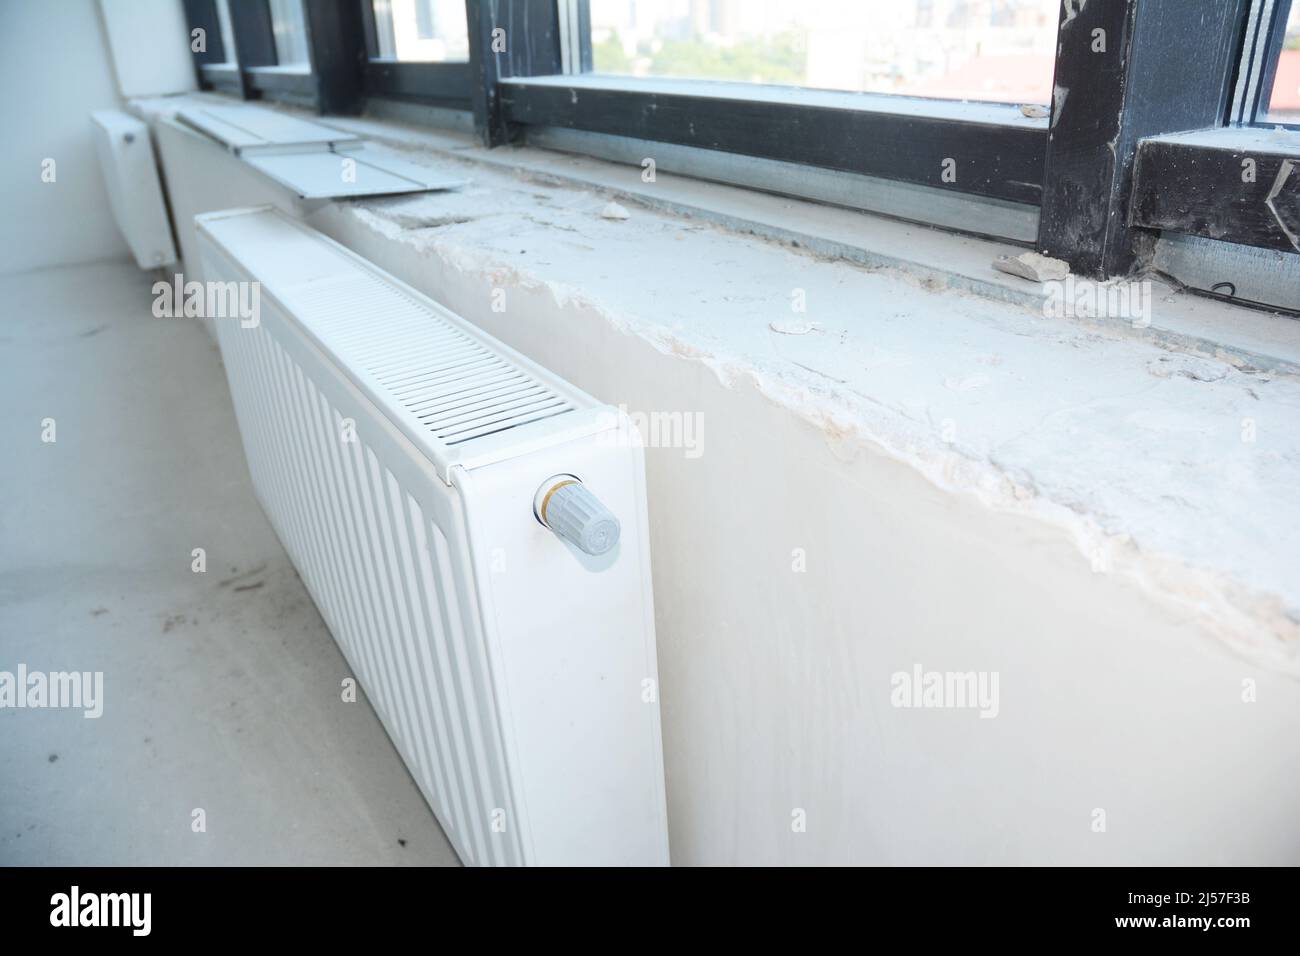 Installing radiator heating with thermostat in the unfinished empty room. Stock Photo